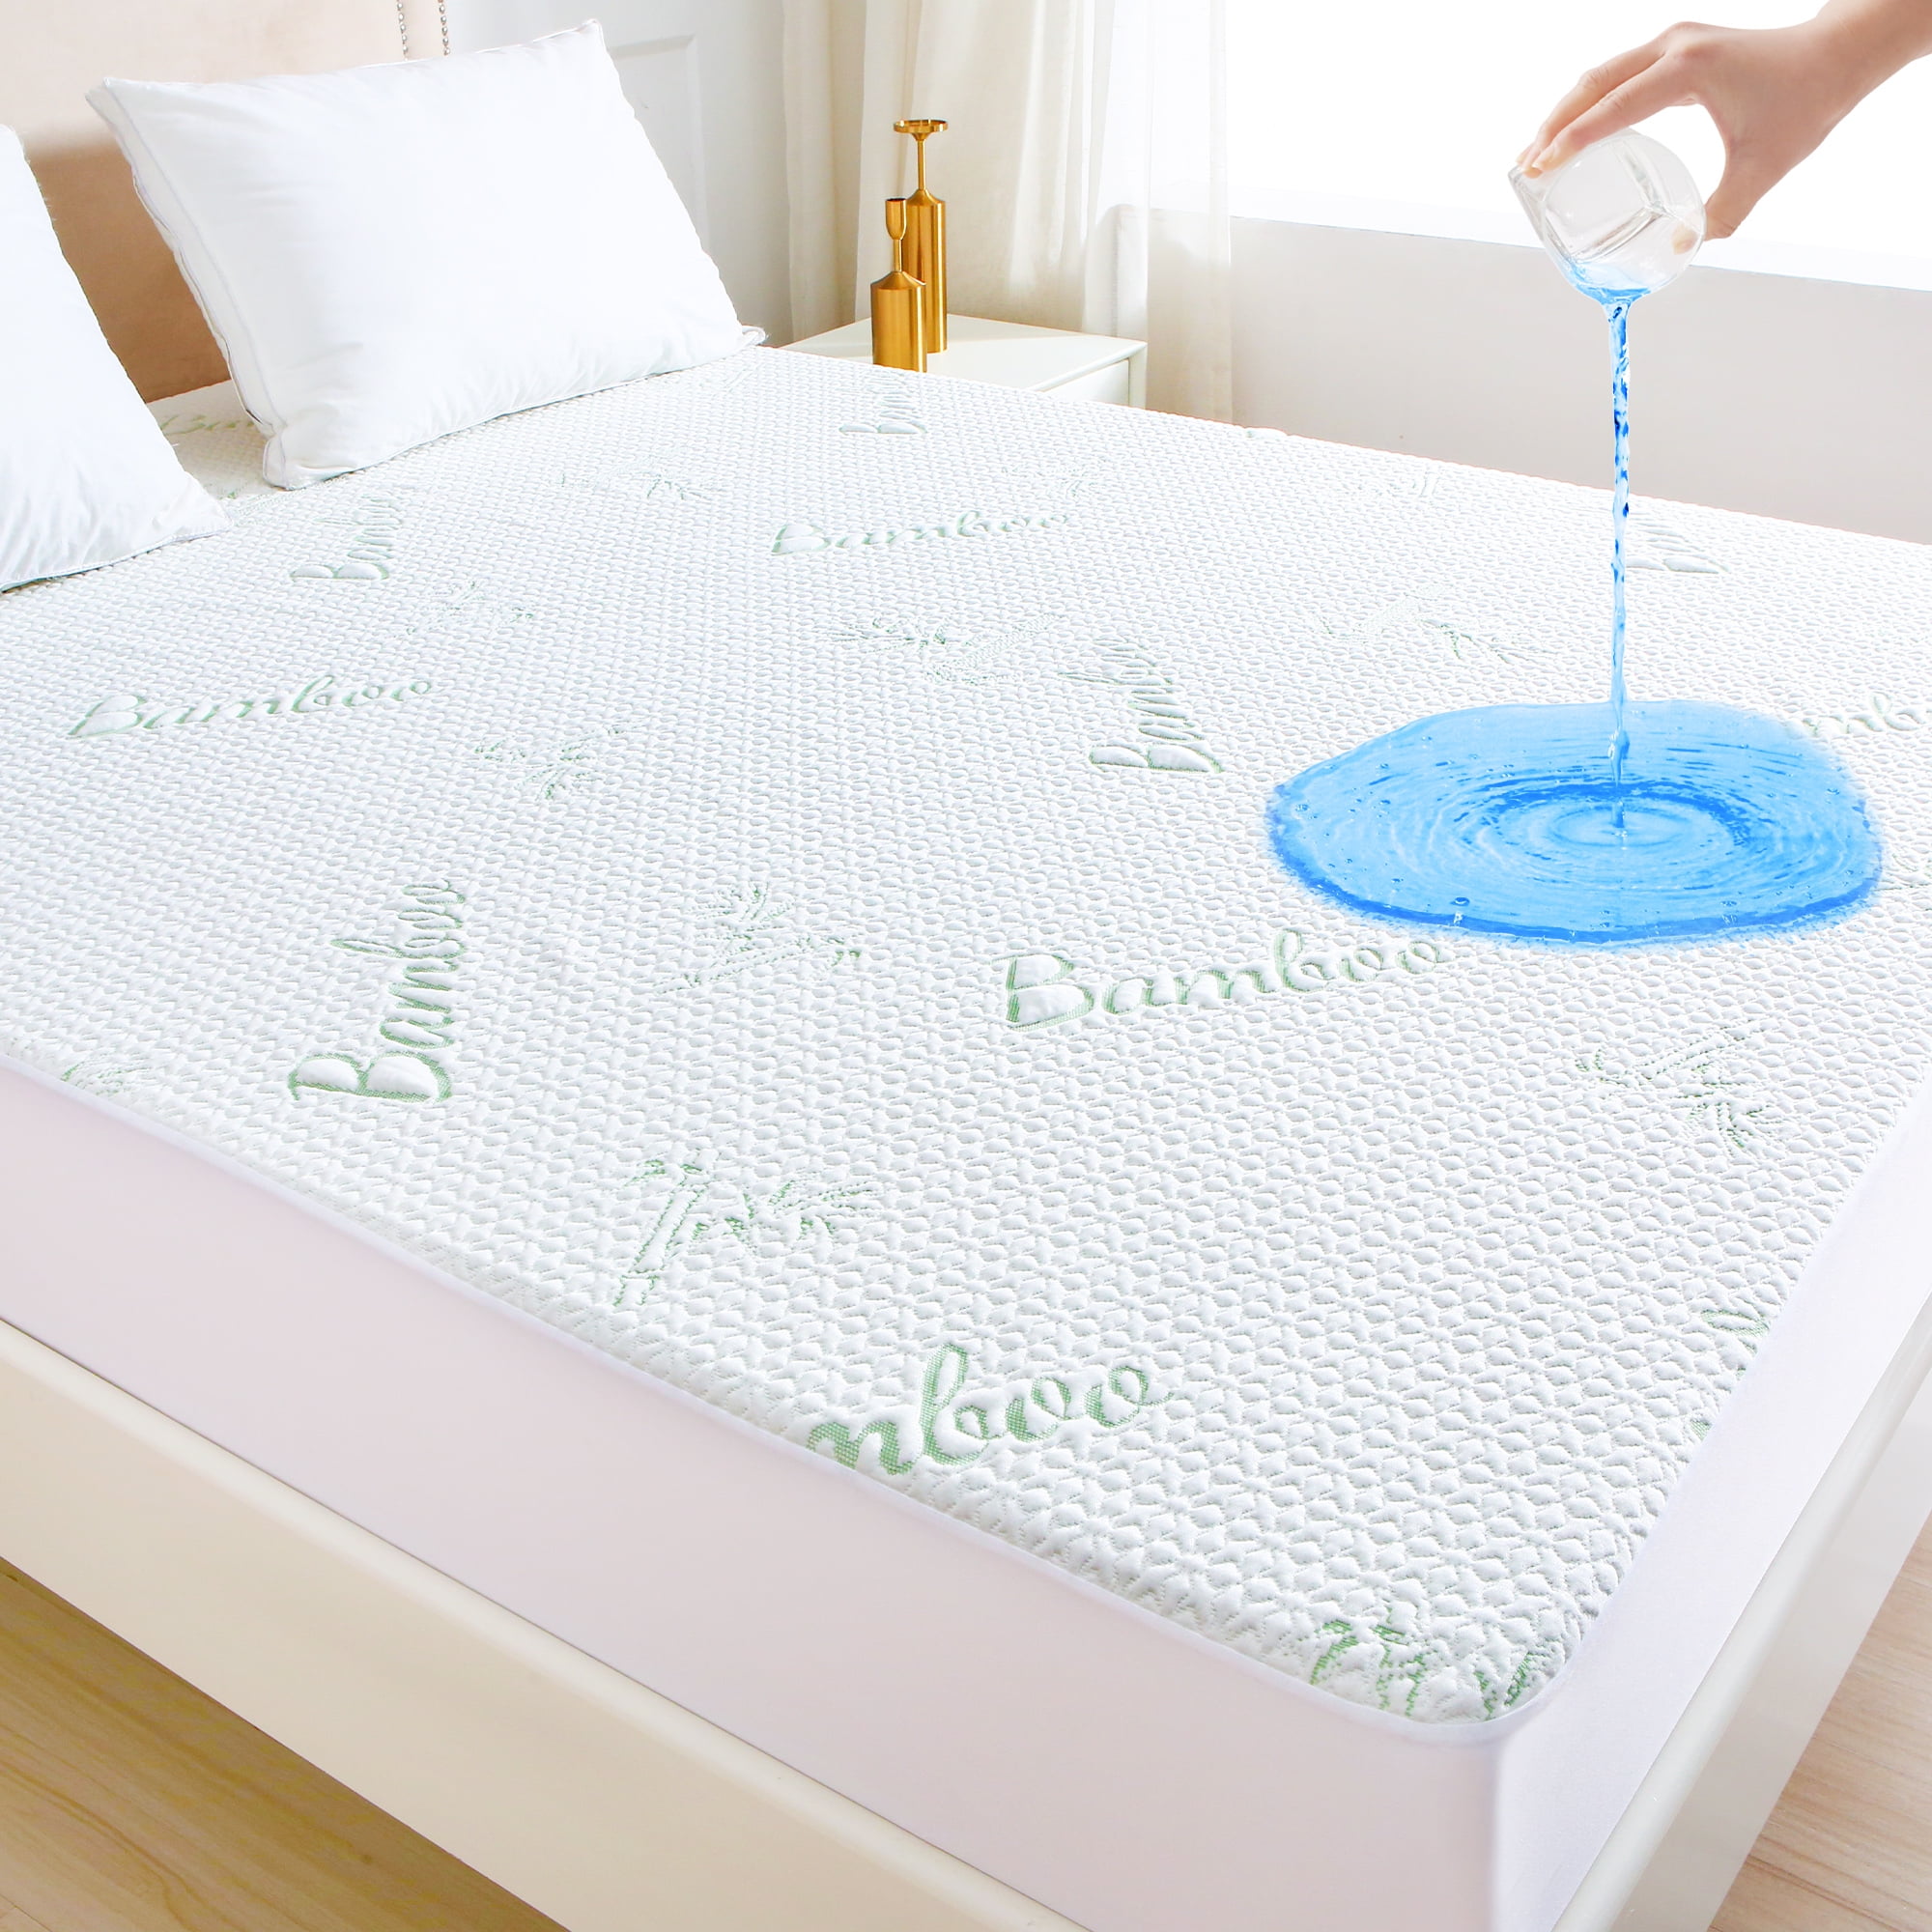 Quilted Waterproof Mattress Protector Pad Twin Size for Air Mattress Soft  Noiseless Fitted Matress Cover with Elastic Pocket White